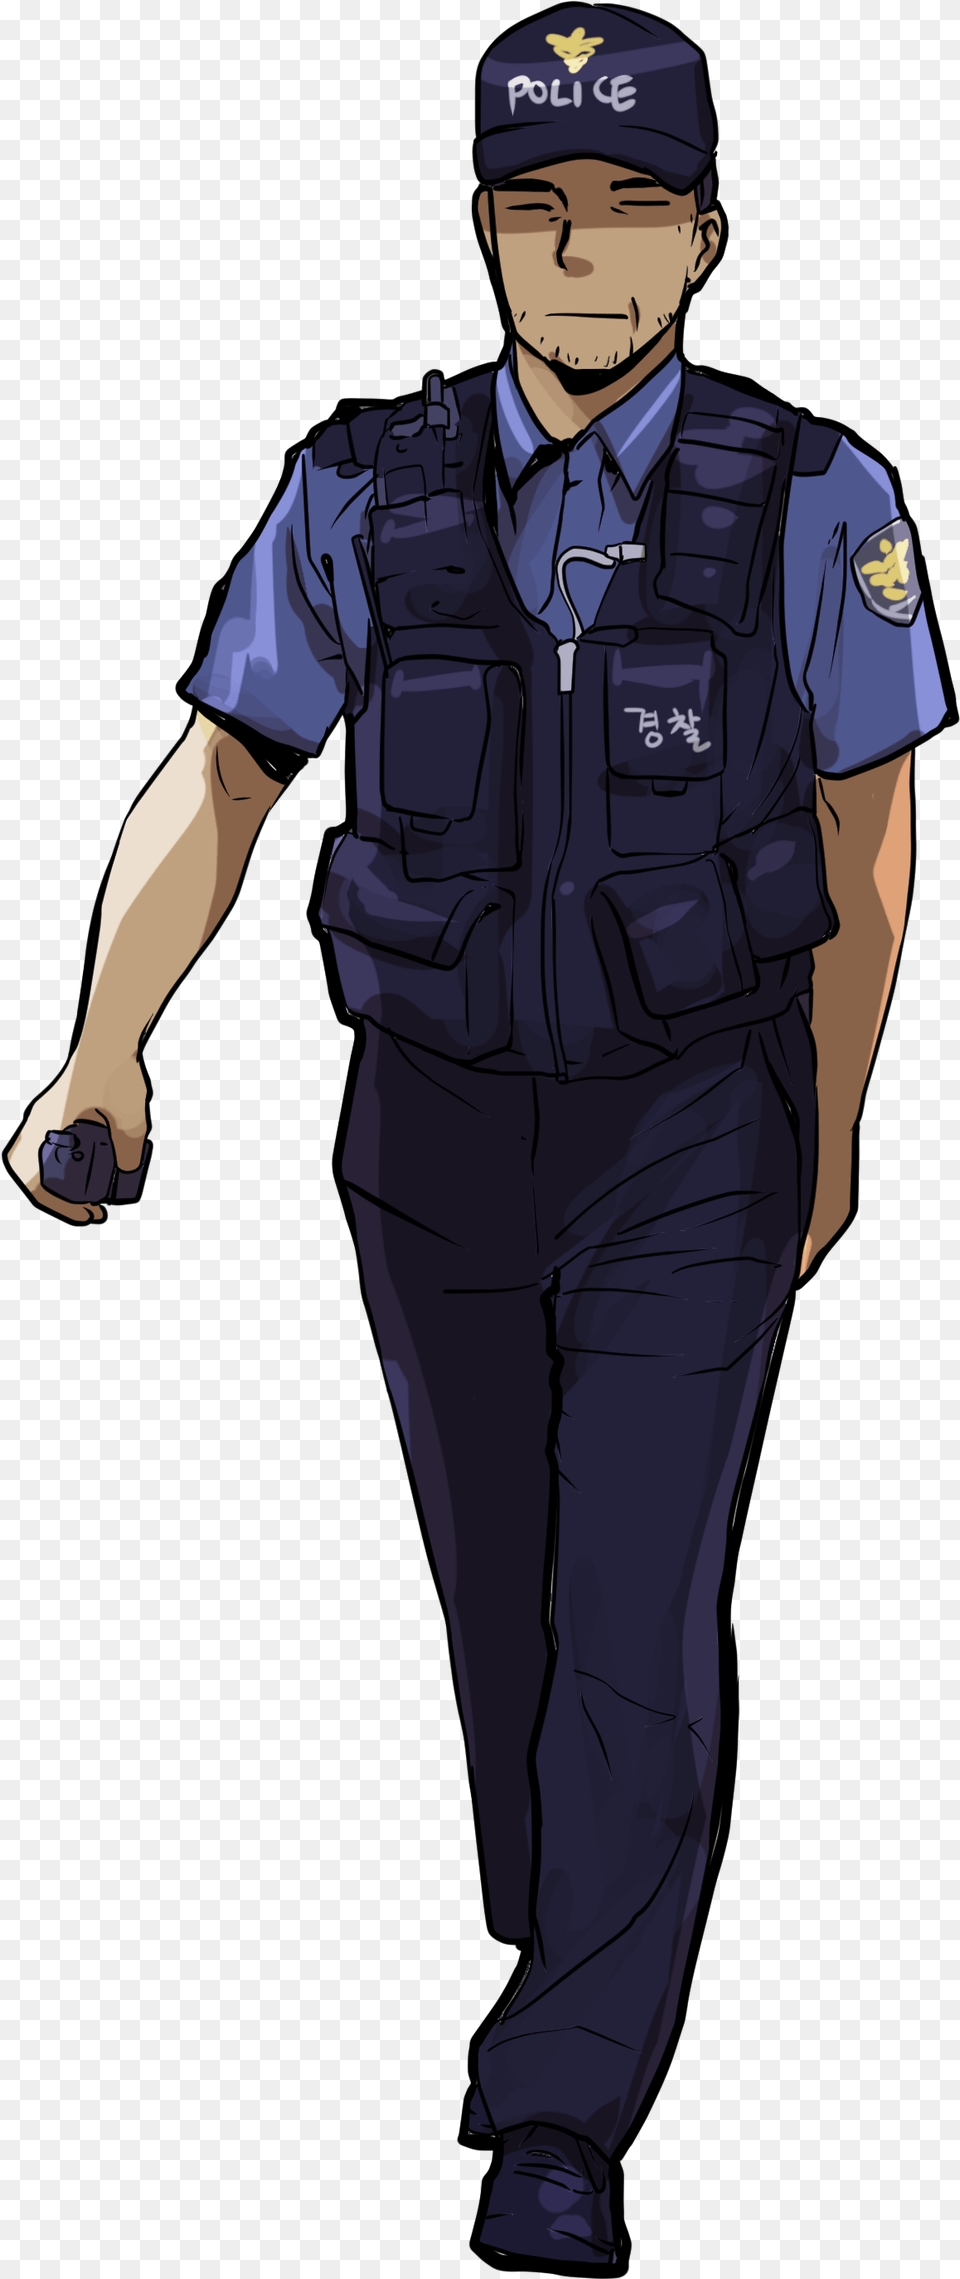 Police Officer Military Uniform Security Male Police Officer, Adult, Man, Person, Face Png